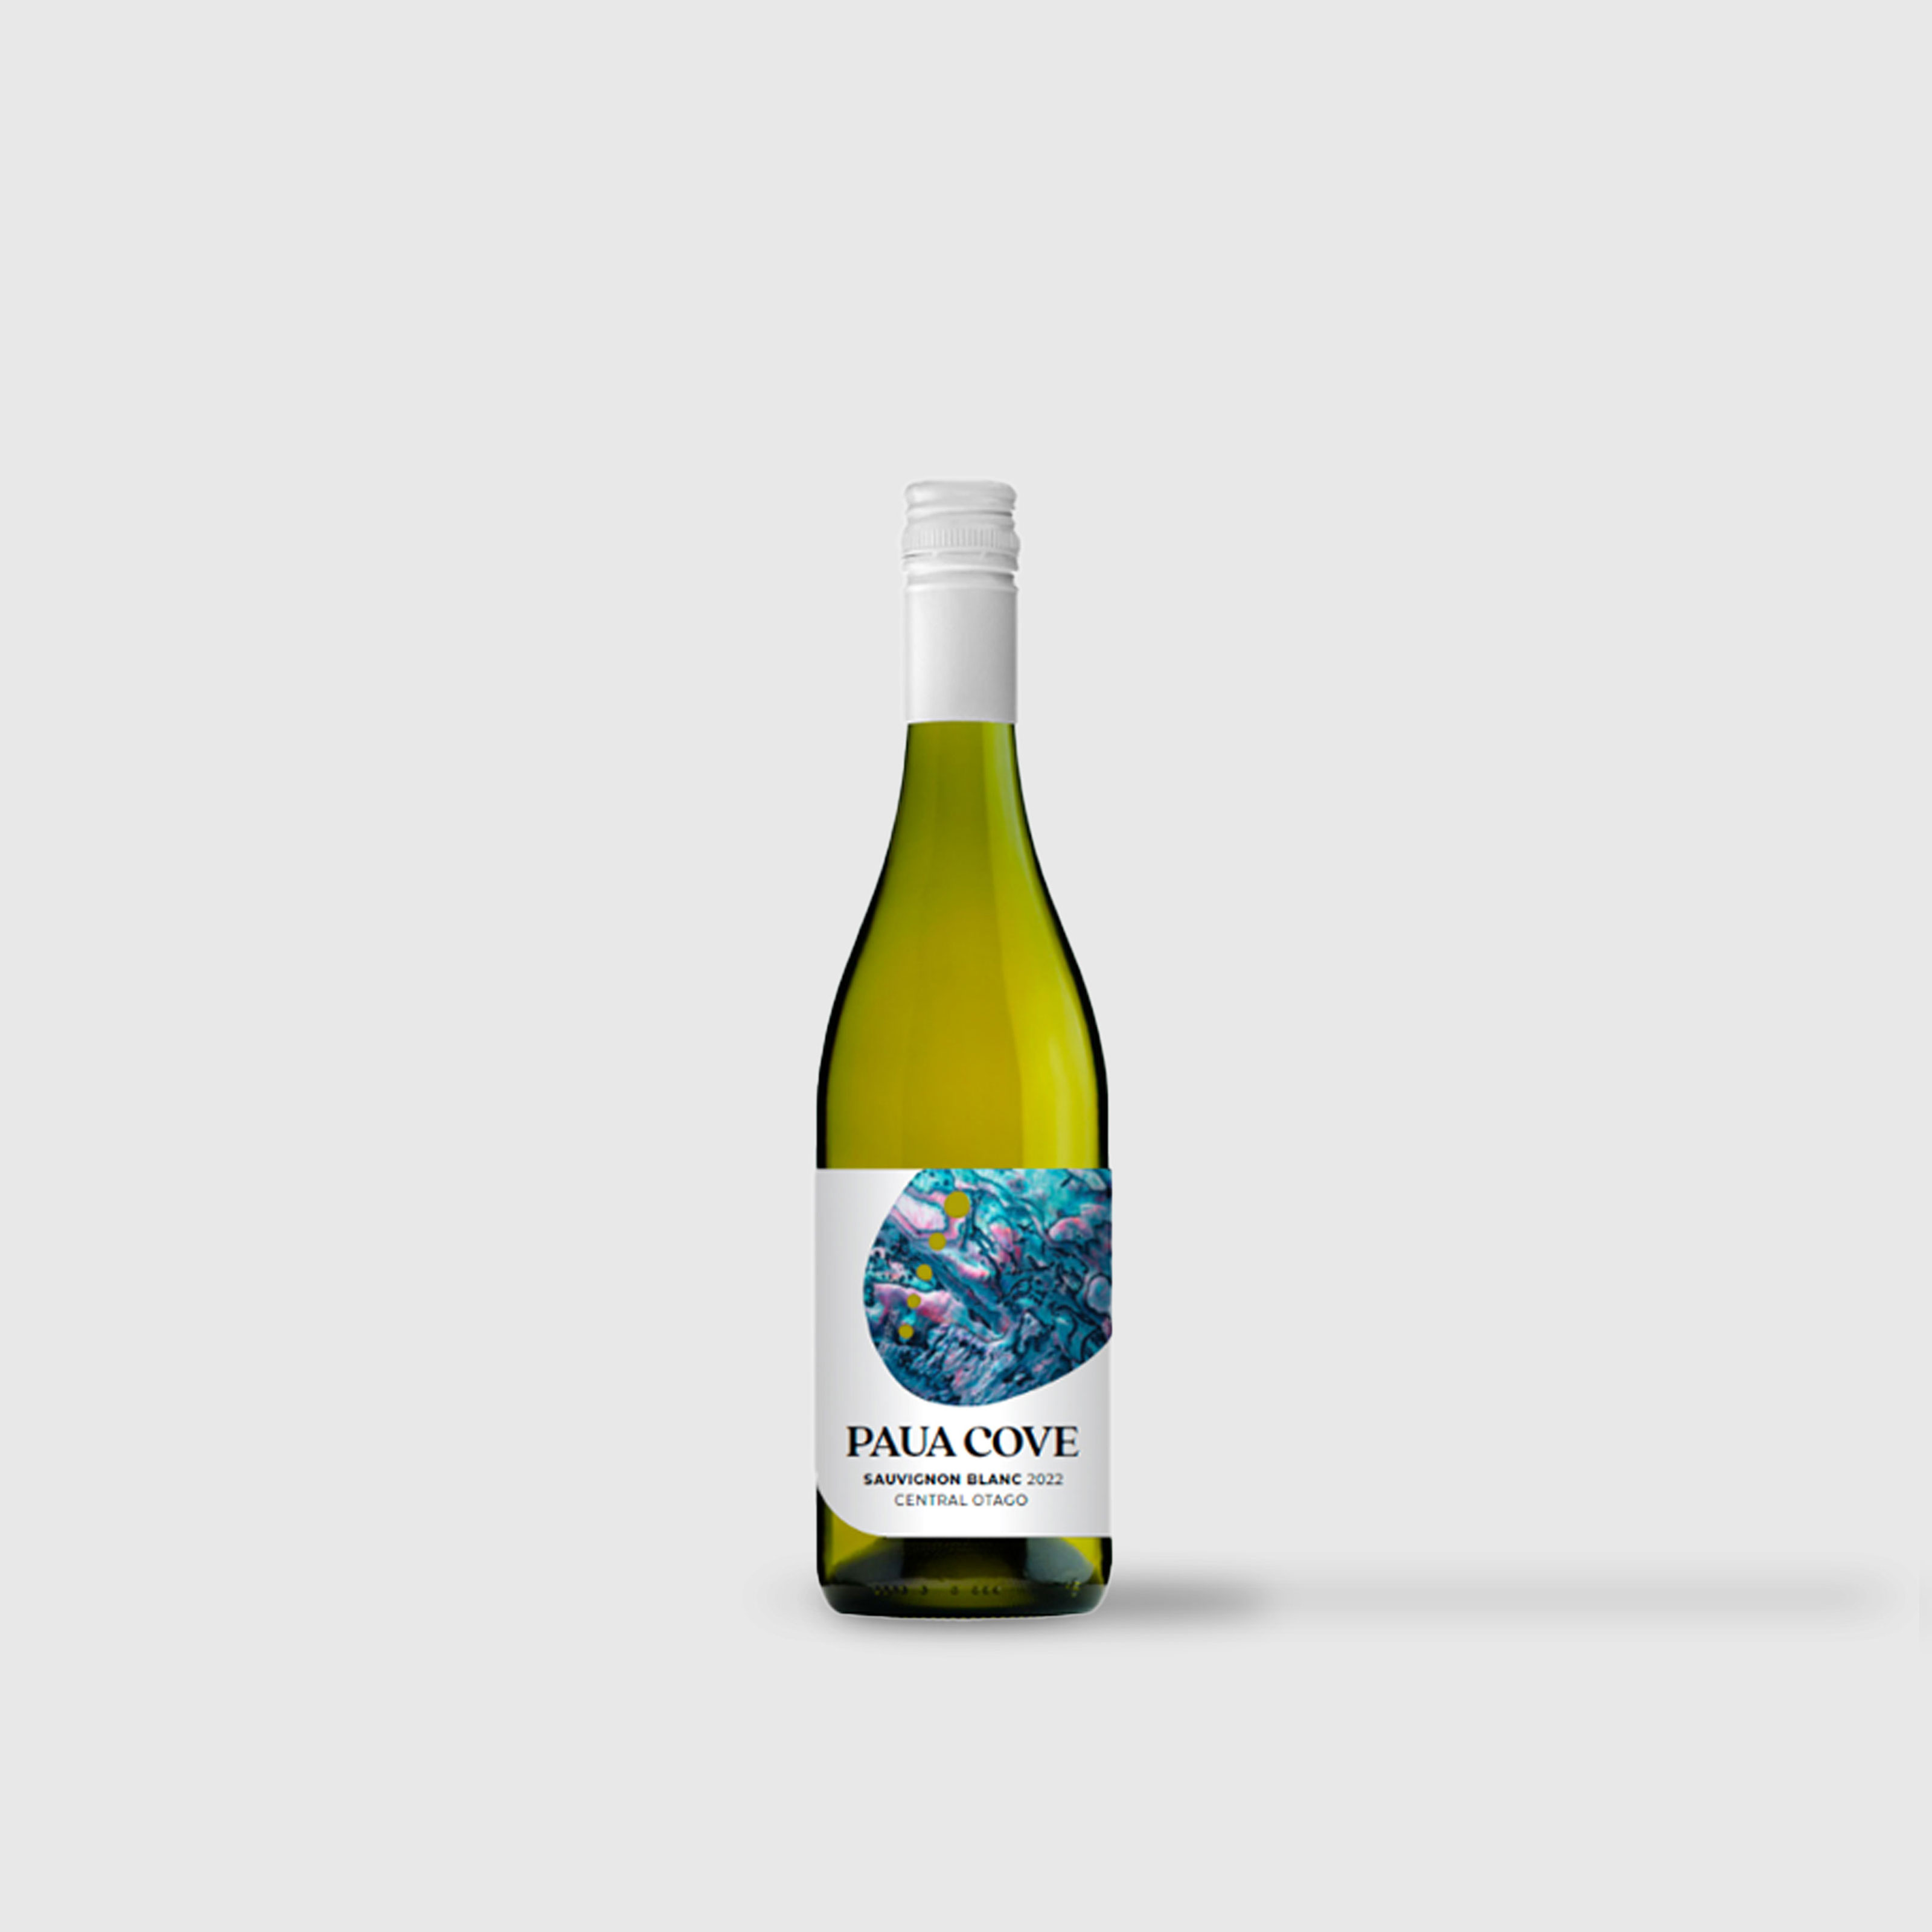 Now NZ Hill Sacred Hawkes Chardonnay - Online Yellow Vineonline at Vine Bay 2022 Label - Buy